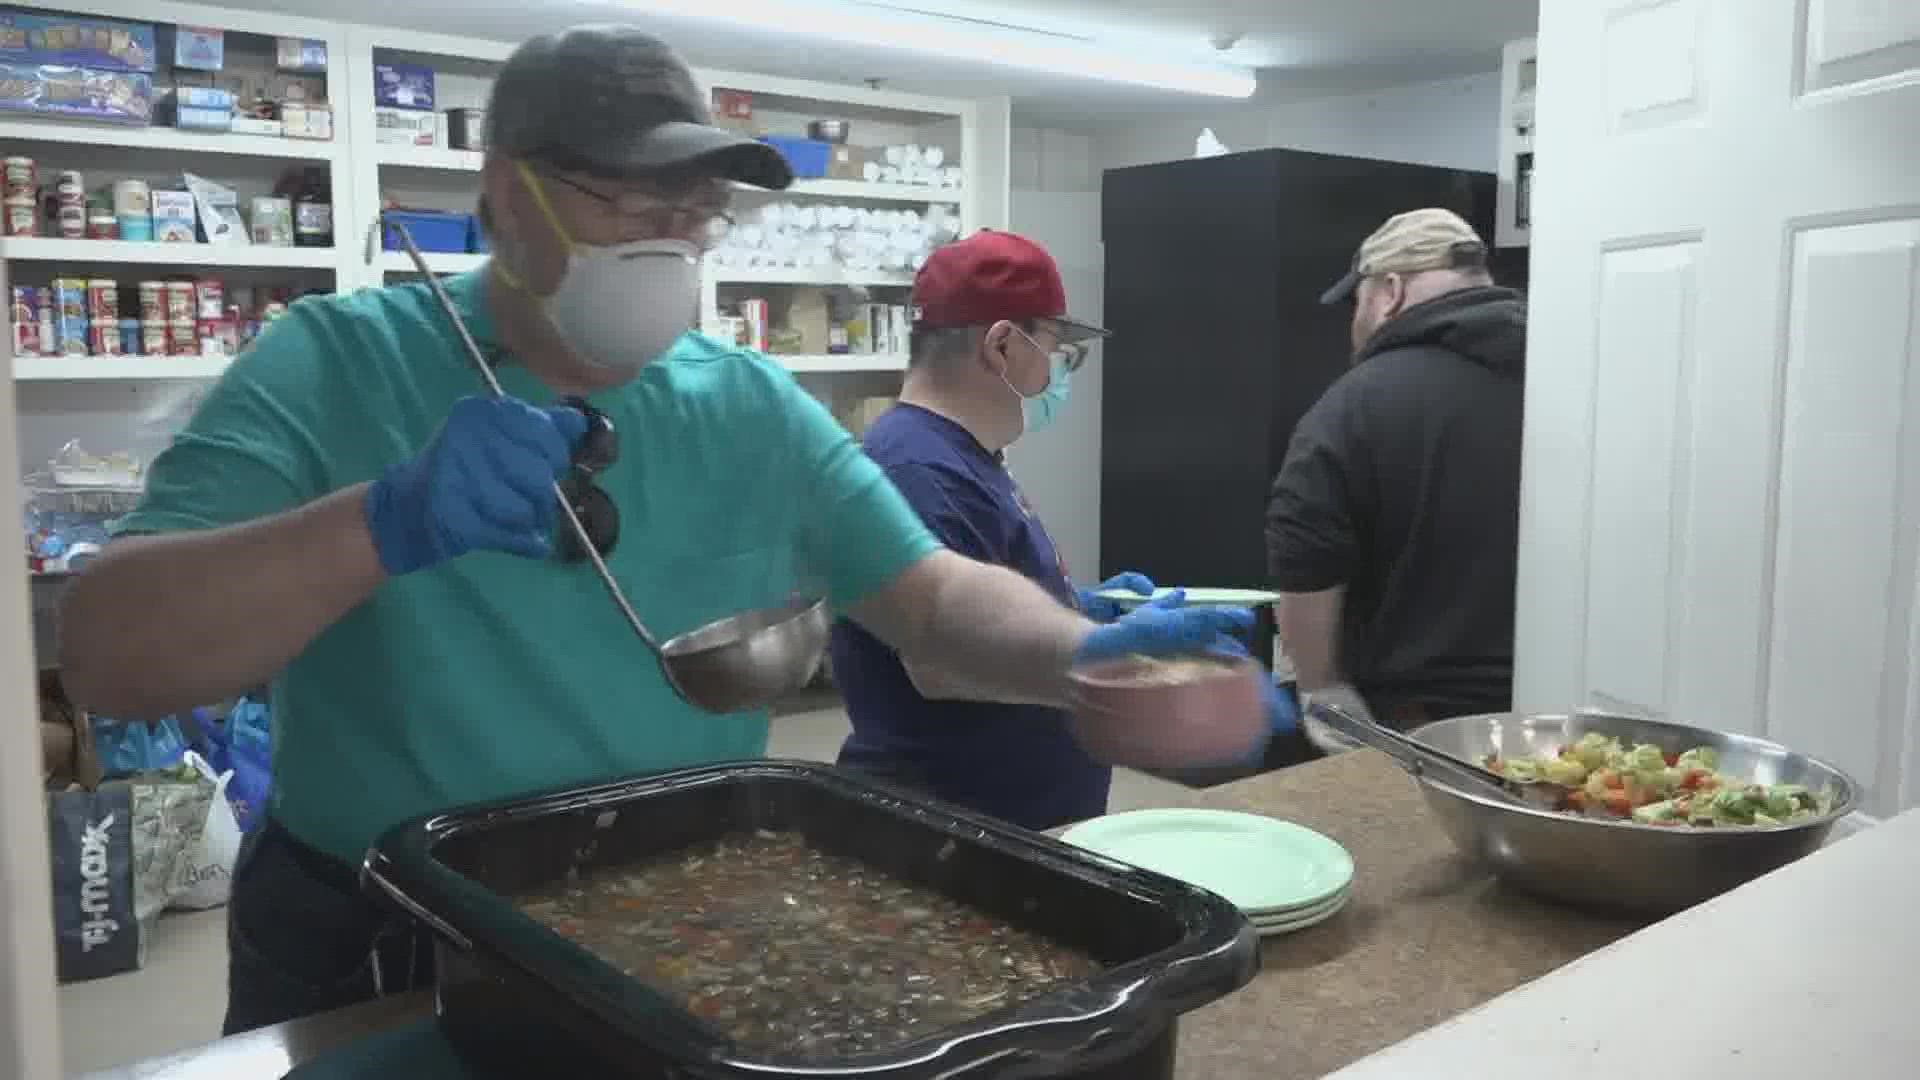 The shelter serves dozens of meals each day, and now they have more space to prepare food, along with a few helpers who are learning kitchen skills along the way.